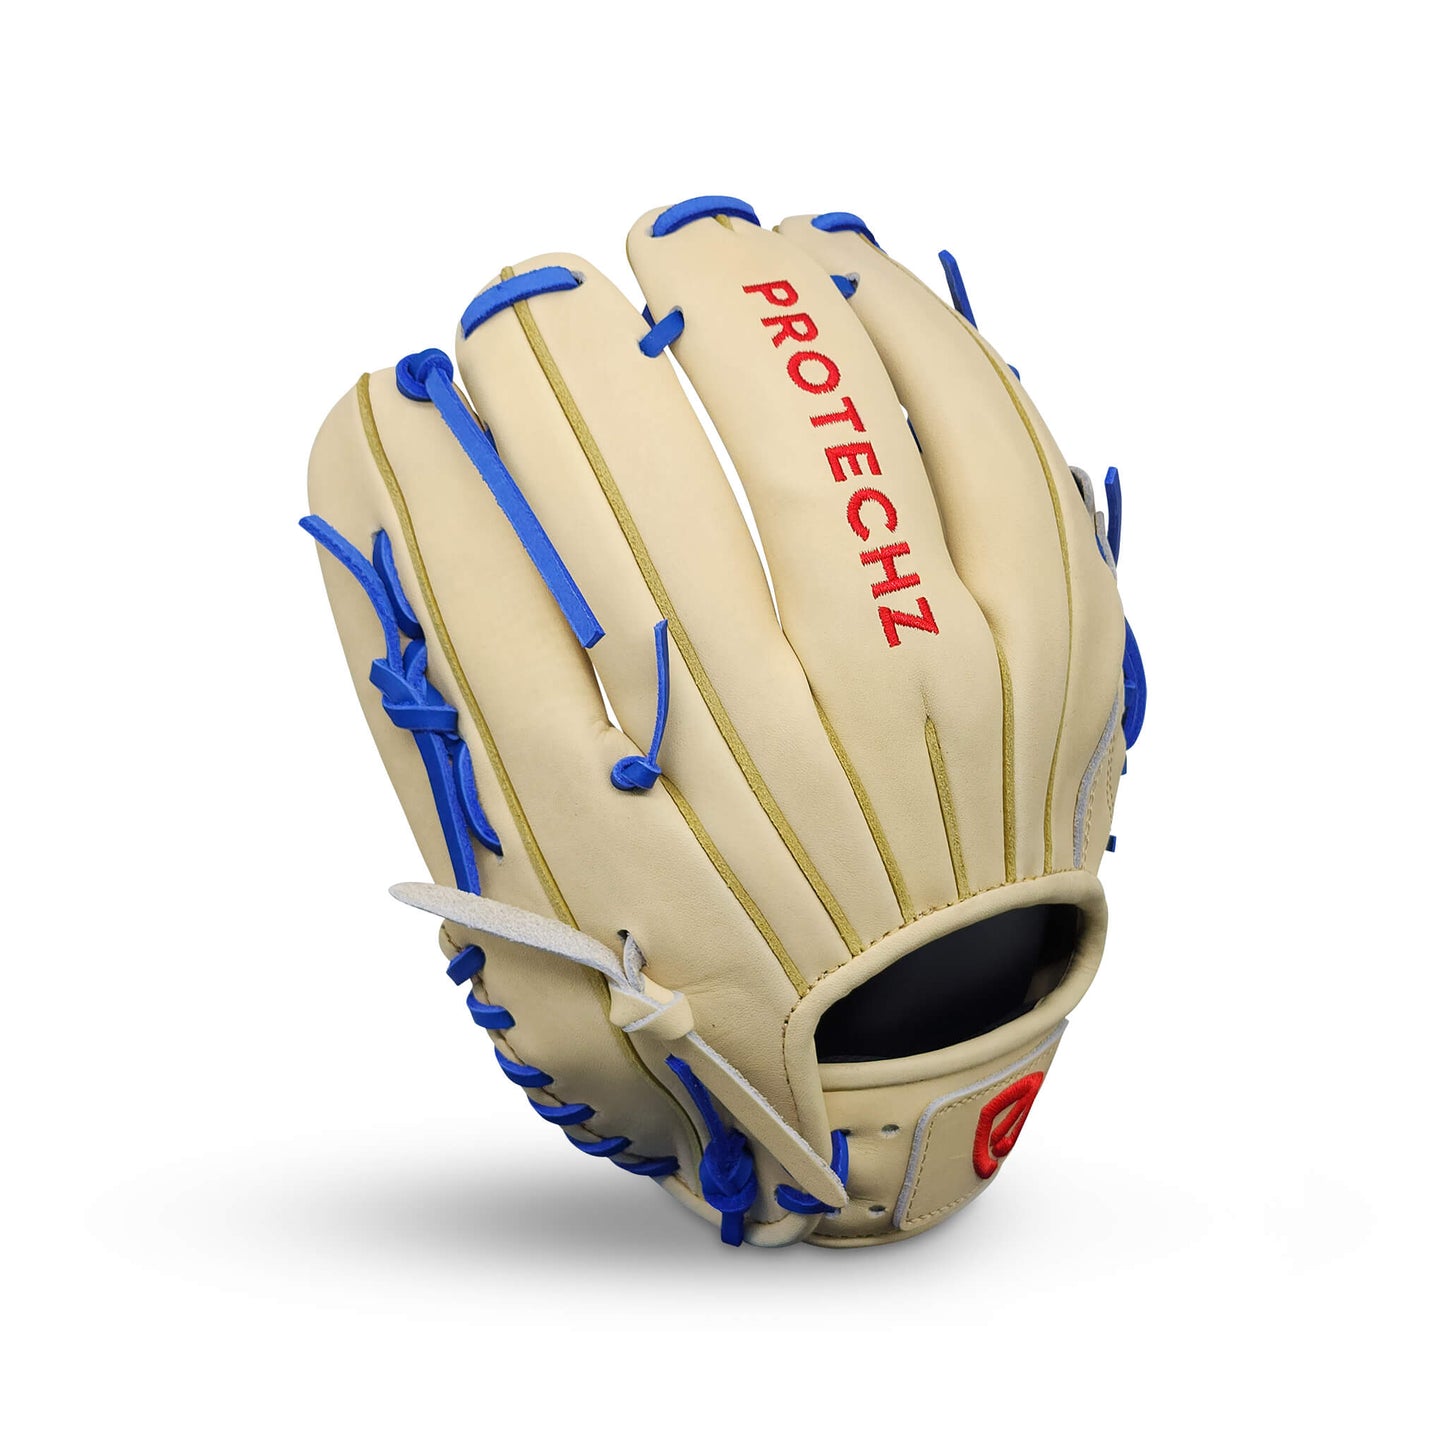 Titan Series Limited Edition 11.50” Infield Glove with I-Web, Camel Shell and Palm, Royal Blue Lacing, and Embroidered Texas Flag – RHT